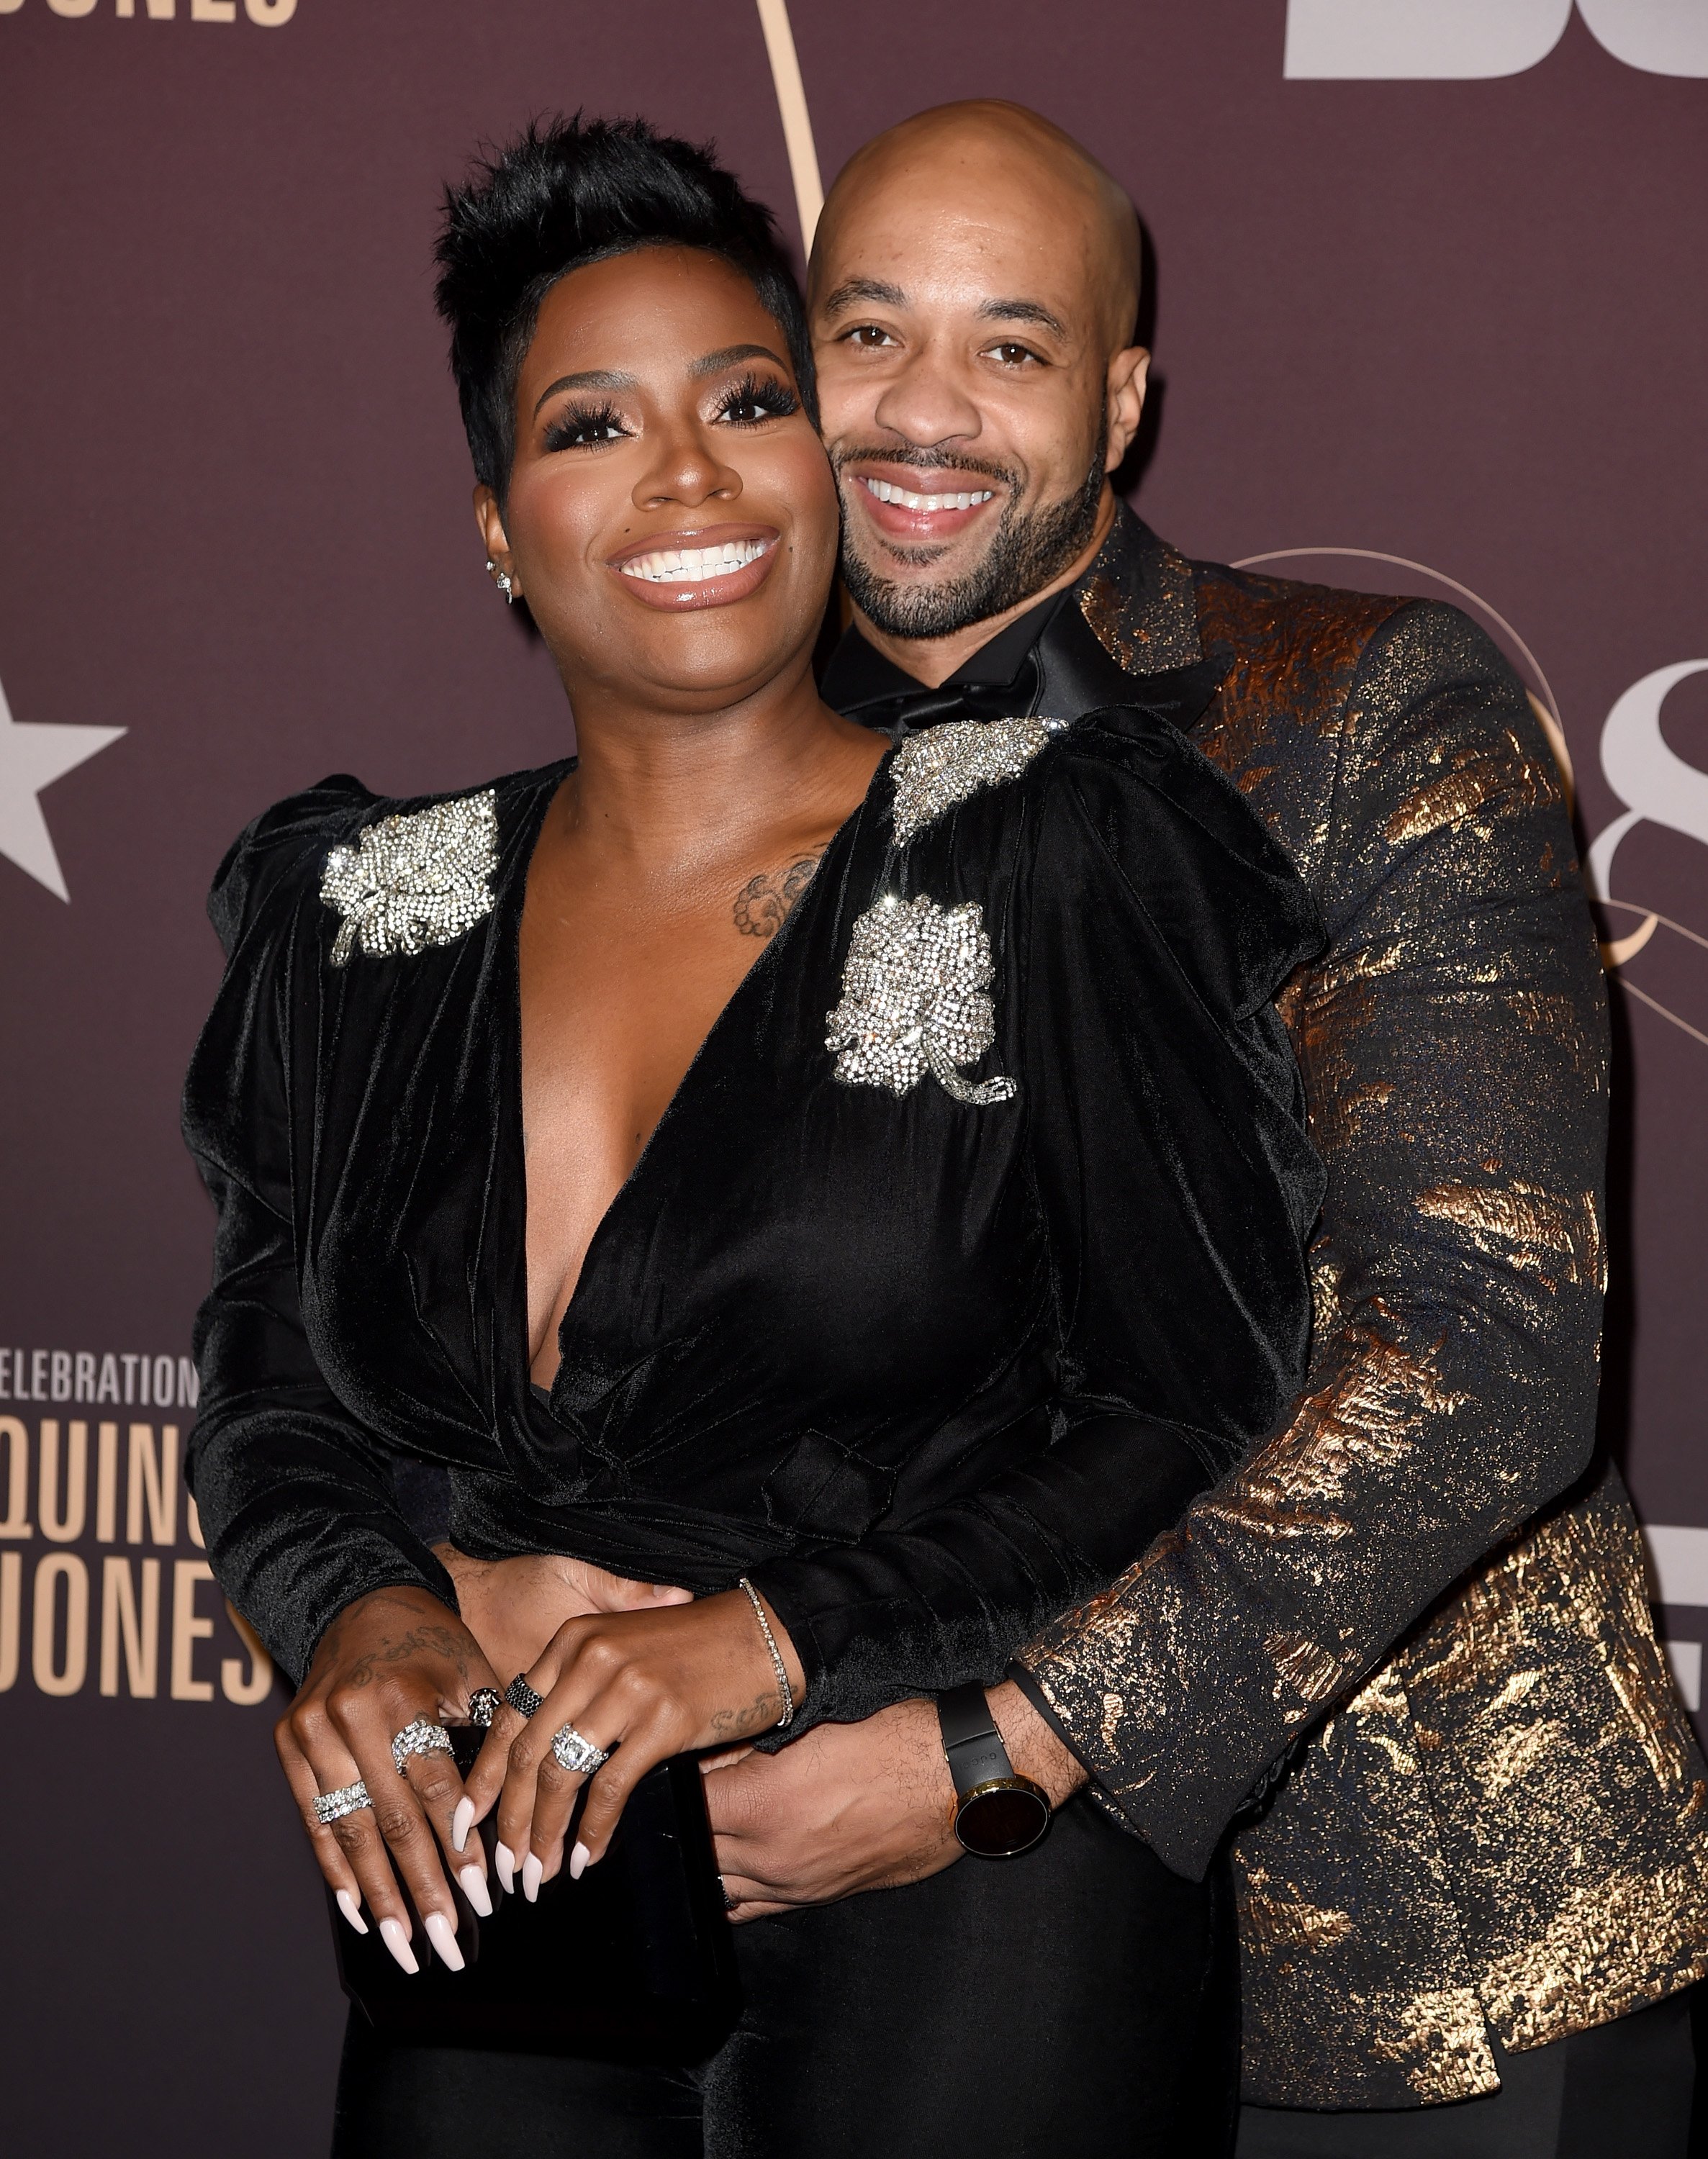 Fantasia Barrino and her husband Kendall Taylor arrive at Q85: A Musical Celebration at the Microsoft Theatre on September 25, 2018 in Los Angeles, California | Photo: Getty Images